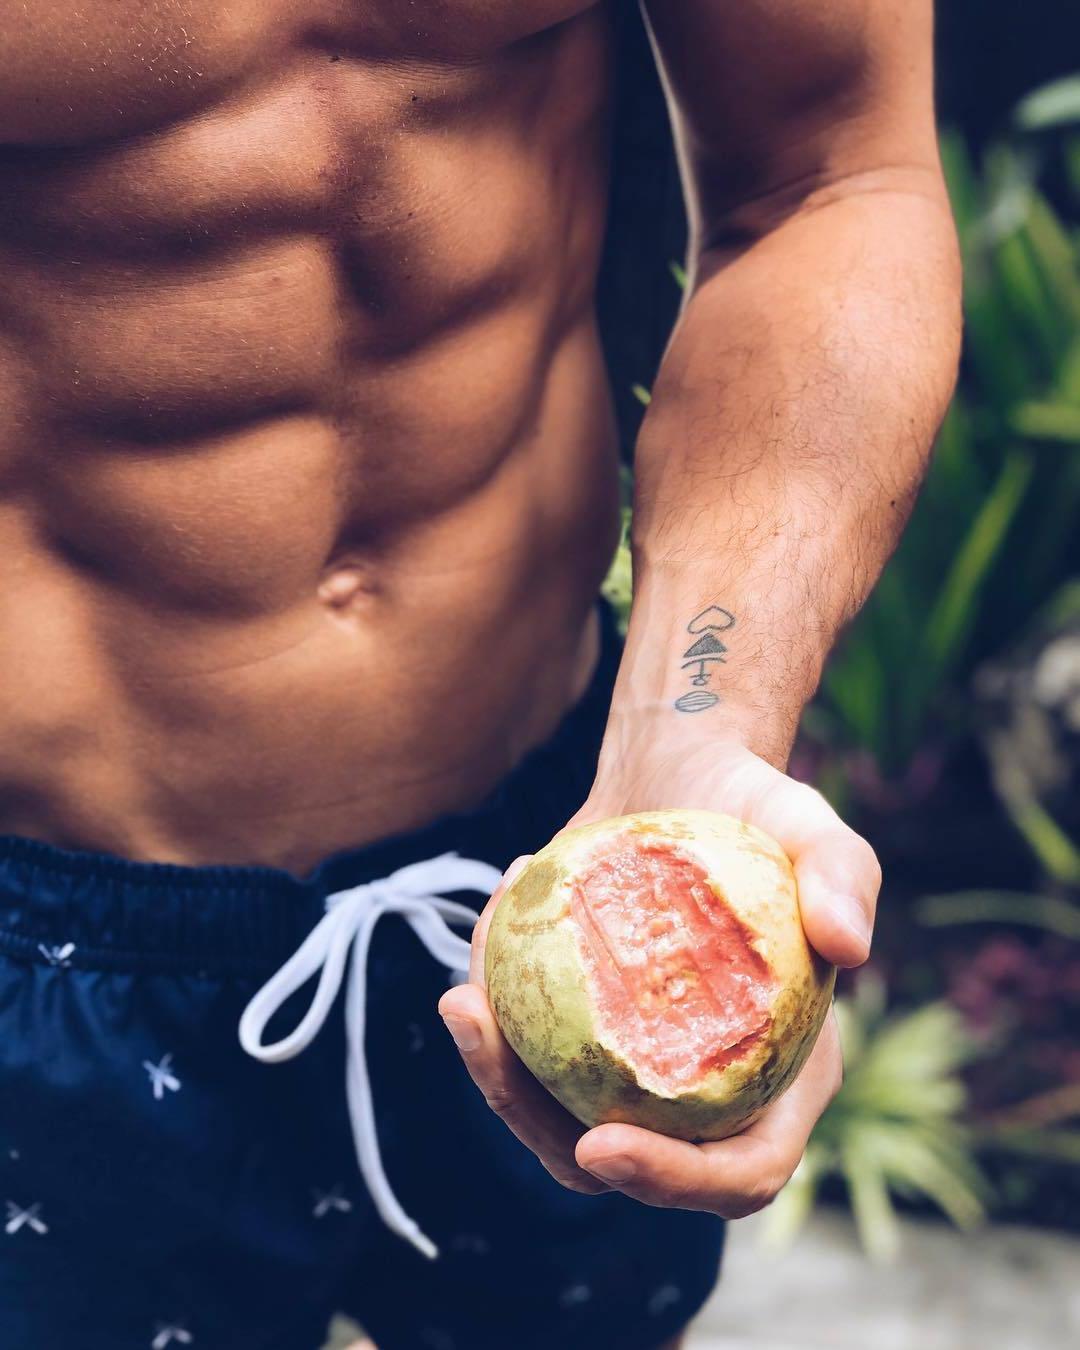 anonymous-sixpack-abs-male-youngster-eating-unknown-tropical-fruit